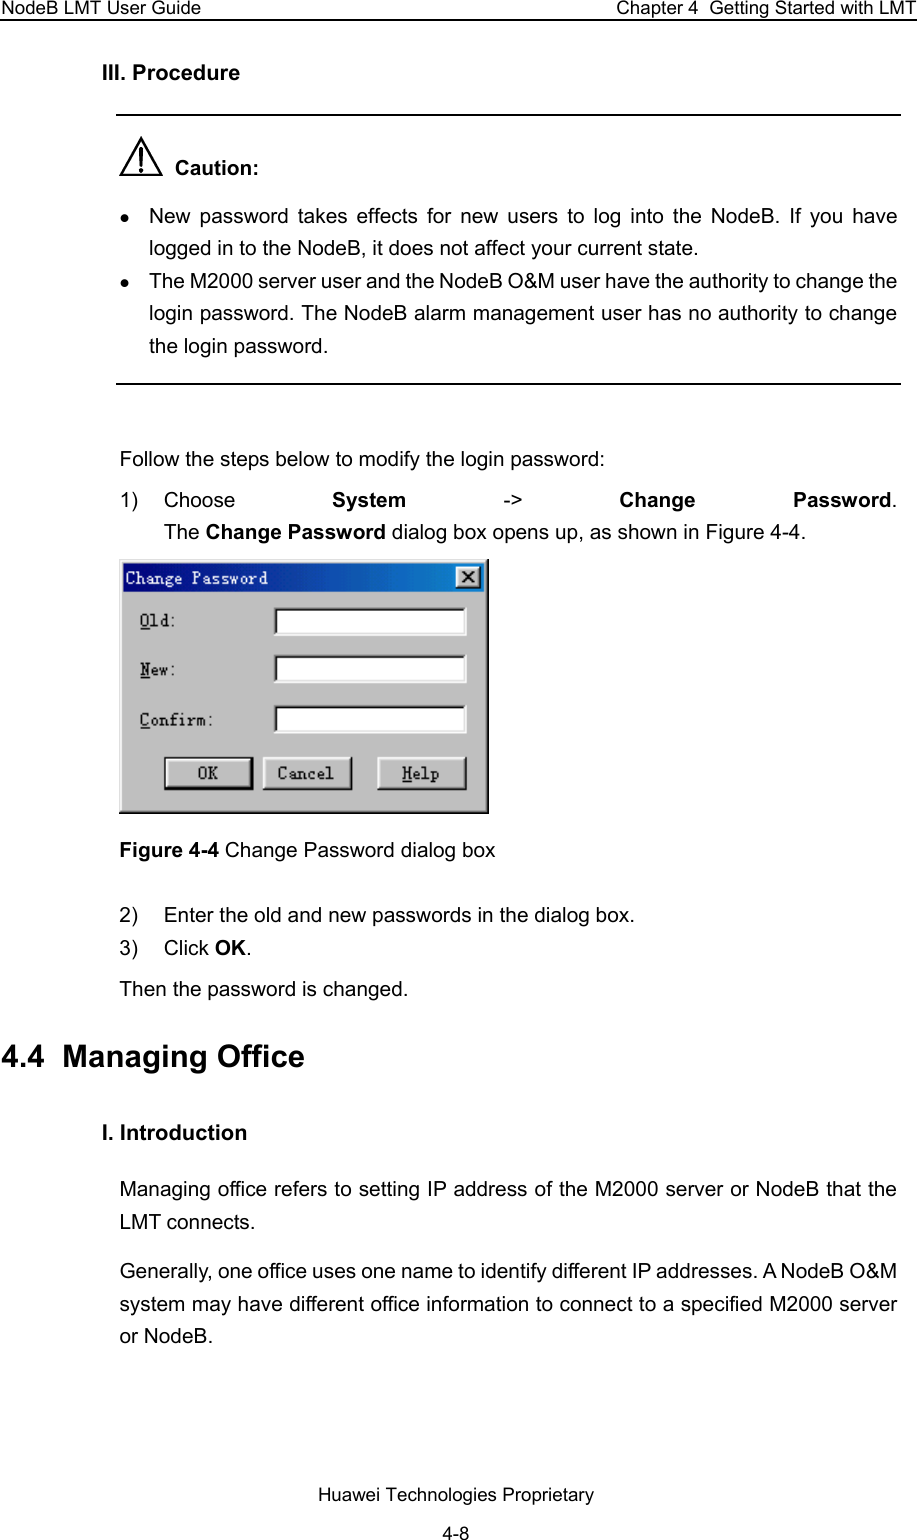 NodeB LMT User Guide  Chapter 4  Getting Started with LMT III. Procedure    Caution:  z New password takes effects for new users to log into the NodeB. If you have logged in to the NodeB, it does not affect your current state.  z The M2000 server user and the NodeB O&amp;M user have the authority to change the login password. The NodeB alarm management user has no authority to change the login password.   Follow the steps below to modify the login password:  1) Choose  System  -&gt;  Change Password.  The Change Password dialog box opens up, as shown in Figure 4-4.   Figure 4-4 Change Password dialog box 2)  Enter the old and new passwords in the dialog box. 3) Click OK. Then the password is changed. 4.4  Managing Office I. Introduction Managing office refers to setting IP address of the M2000 server or NodeB that the LMT connects.  Generally, one office uses one name to identify different IP addresses. A NodeB O&amp;M system may have different office information to connect to a specified M2000 server or NodeB.  Huawei Technologies Proprietary 4-8 